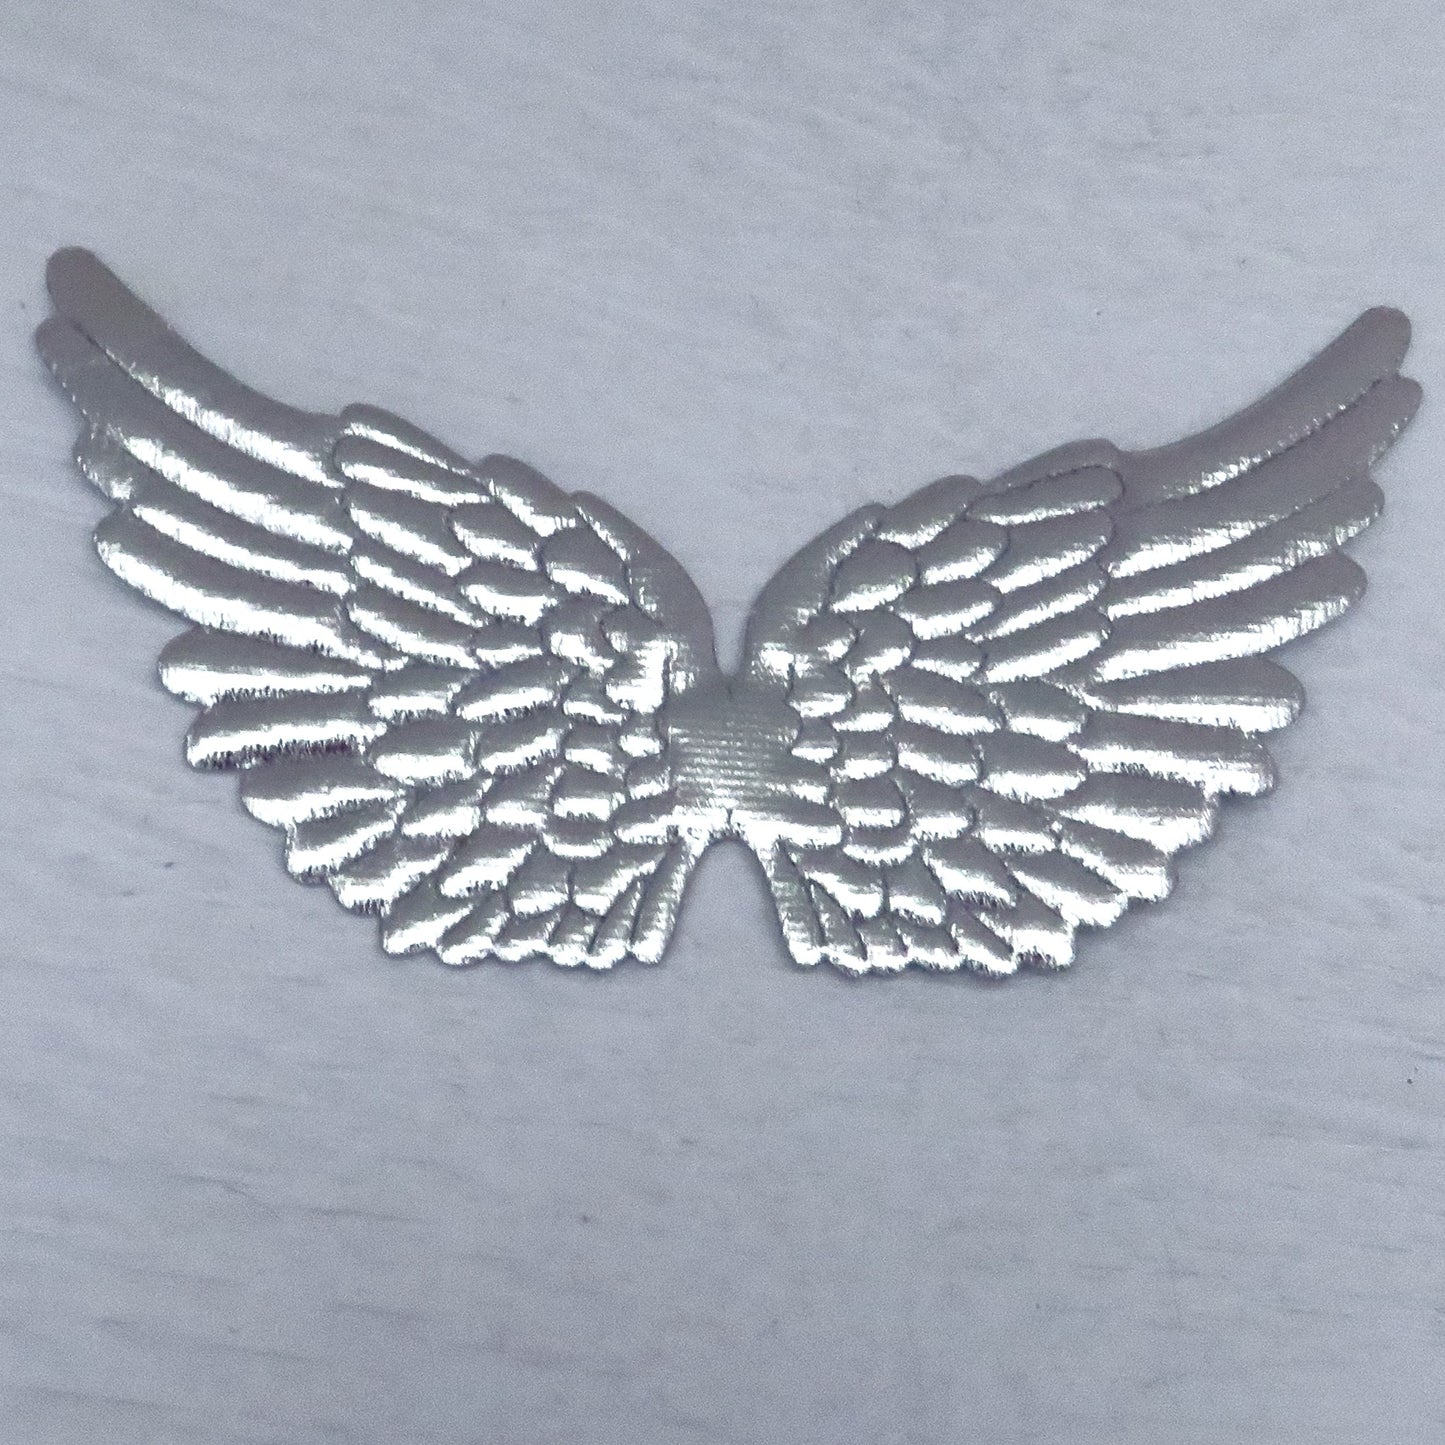 Miniature Angel Wings For Ceramic Figurines, Angel Wing Ornaments